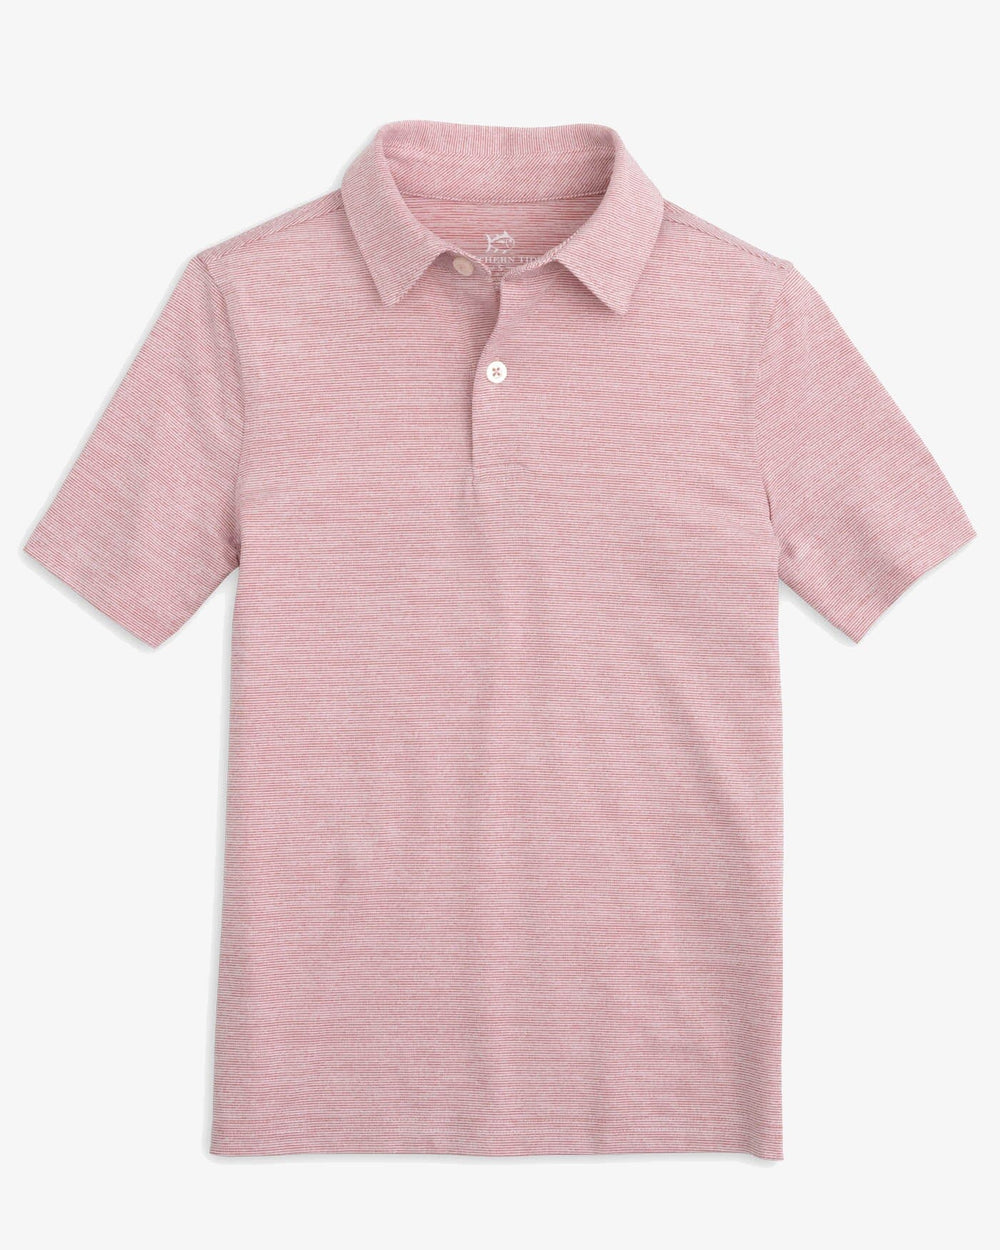 The front view of the Southern Tide Team Colors Boy's Driver Spacedye Polo Shirt by Southern Tide - Crimson